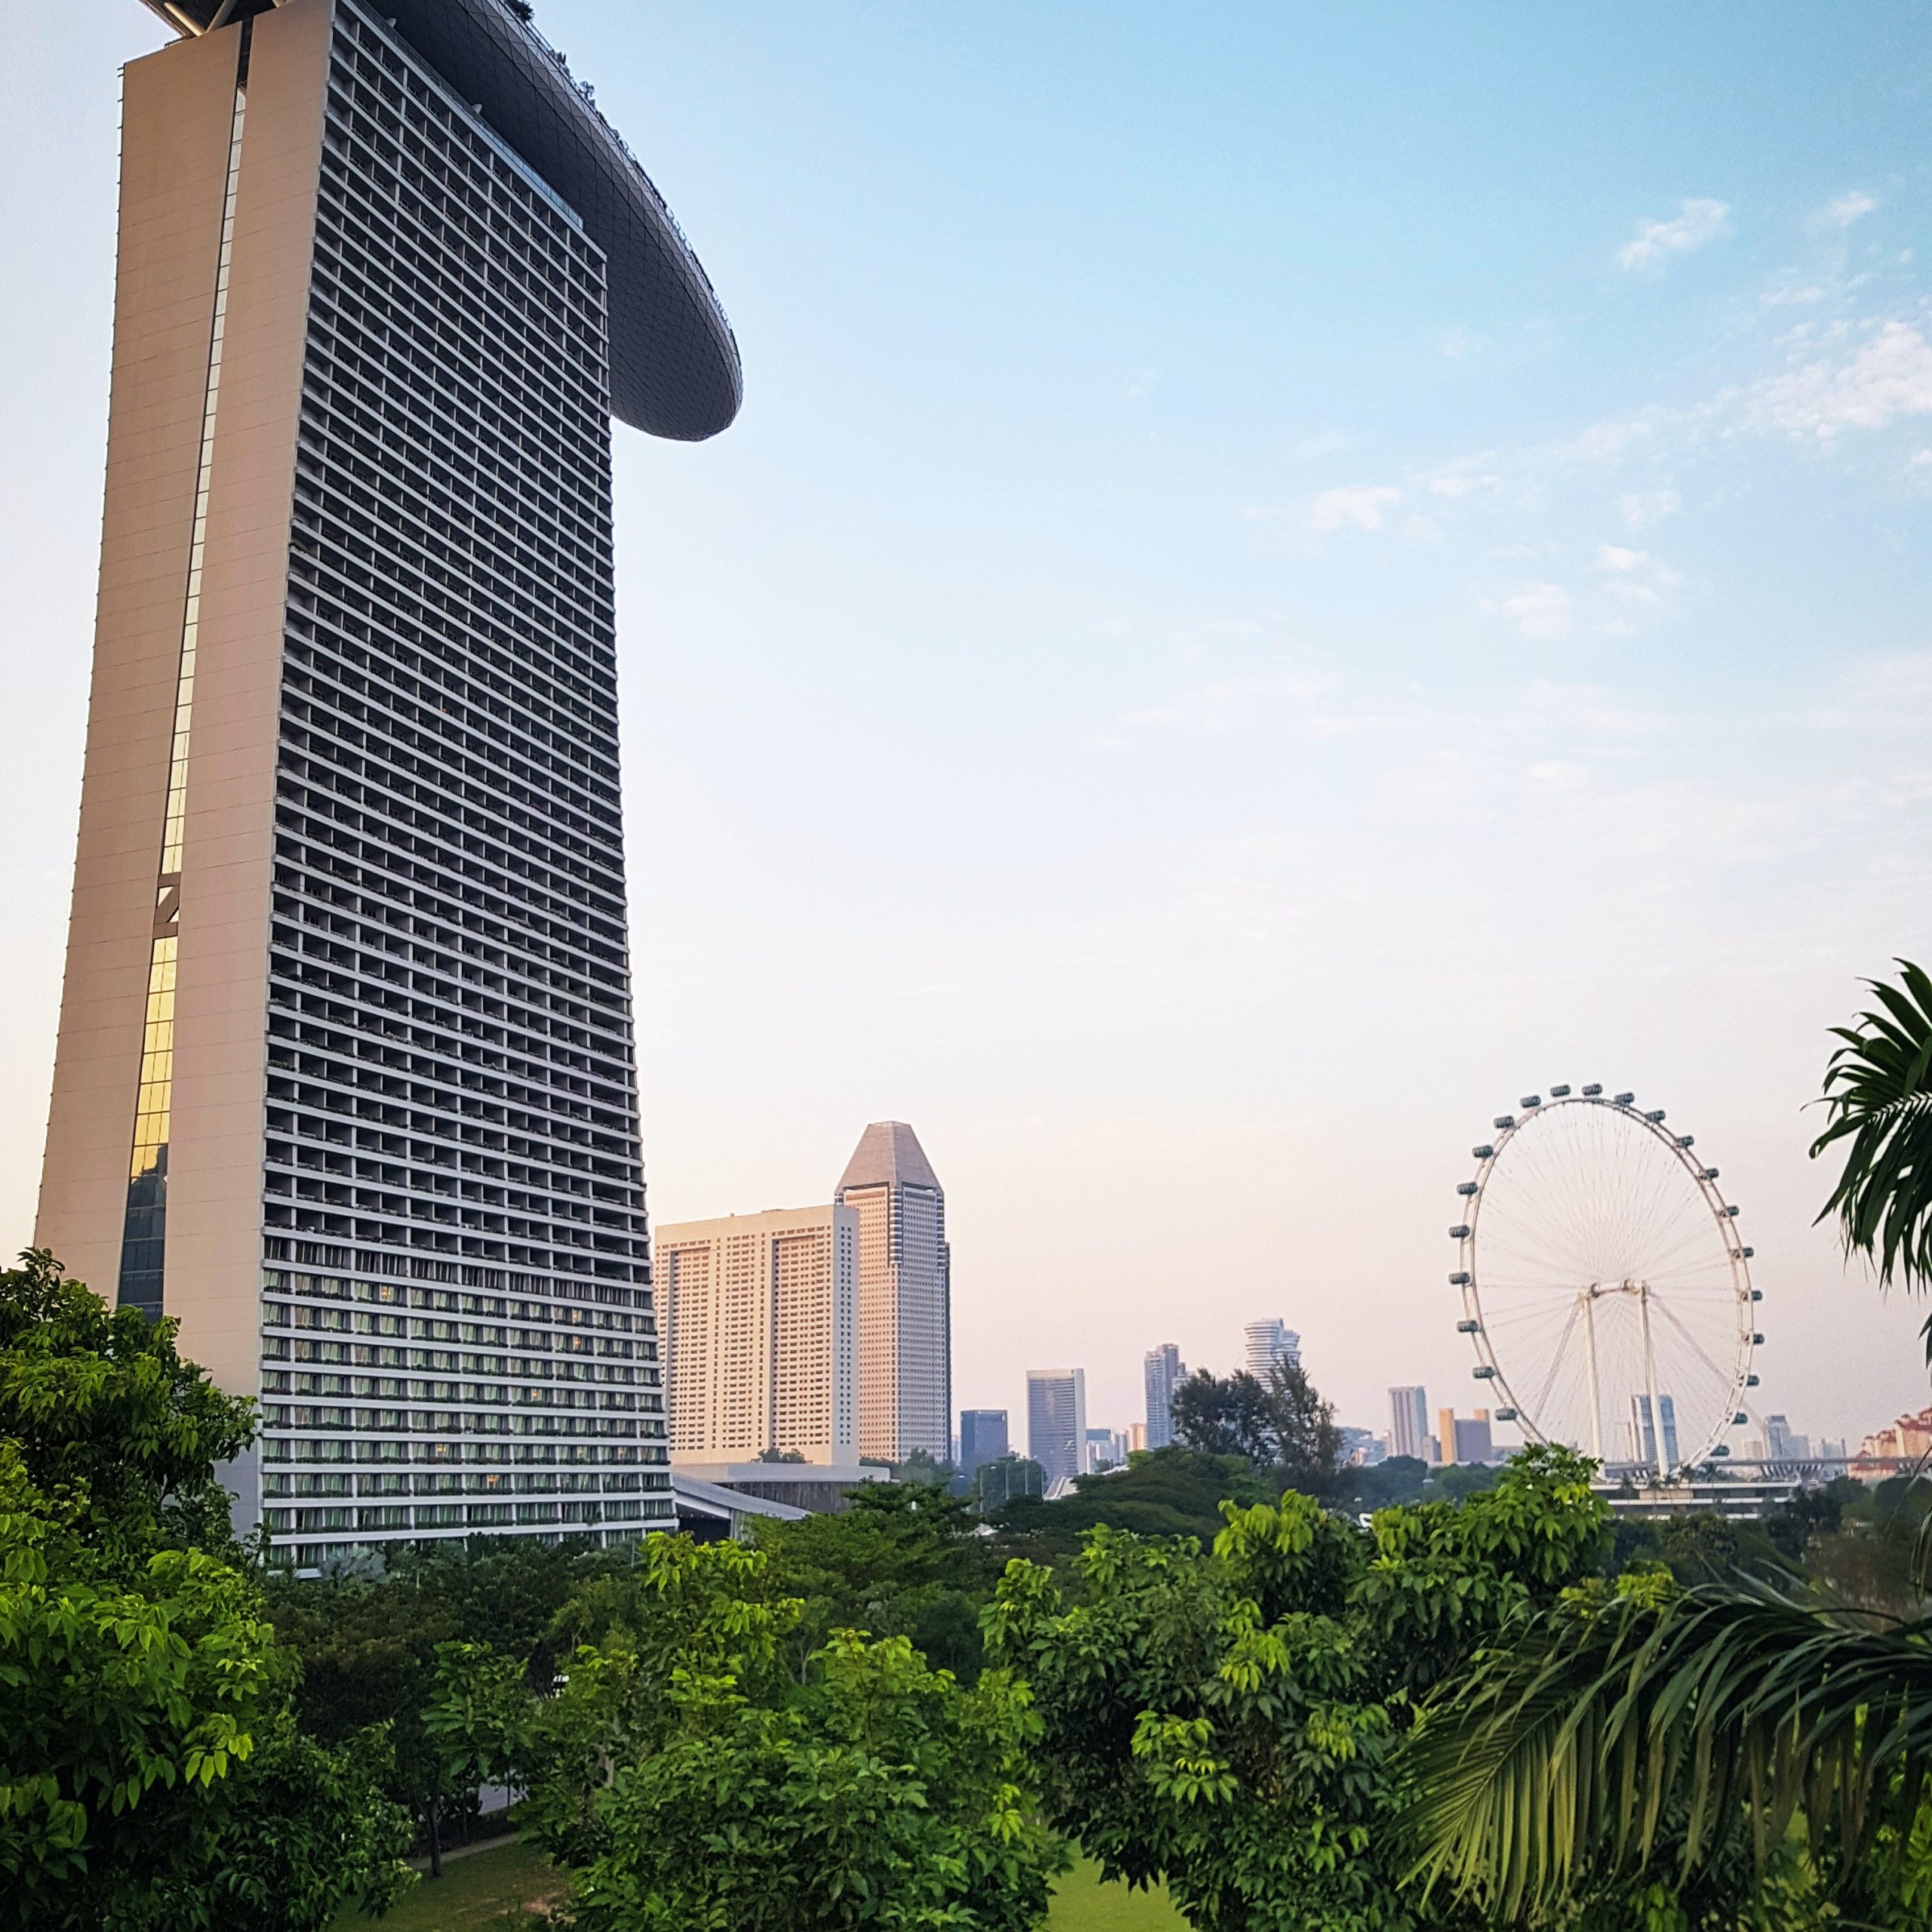 DAY 2 SINGAPORE – CITY TOUR AND SENTOSA ISLAND (One way Cable Car + Madam Tussauds Museum + SEA Aquarium + Wings of Time show)